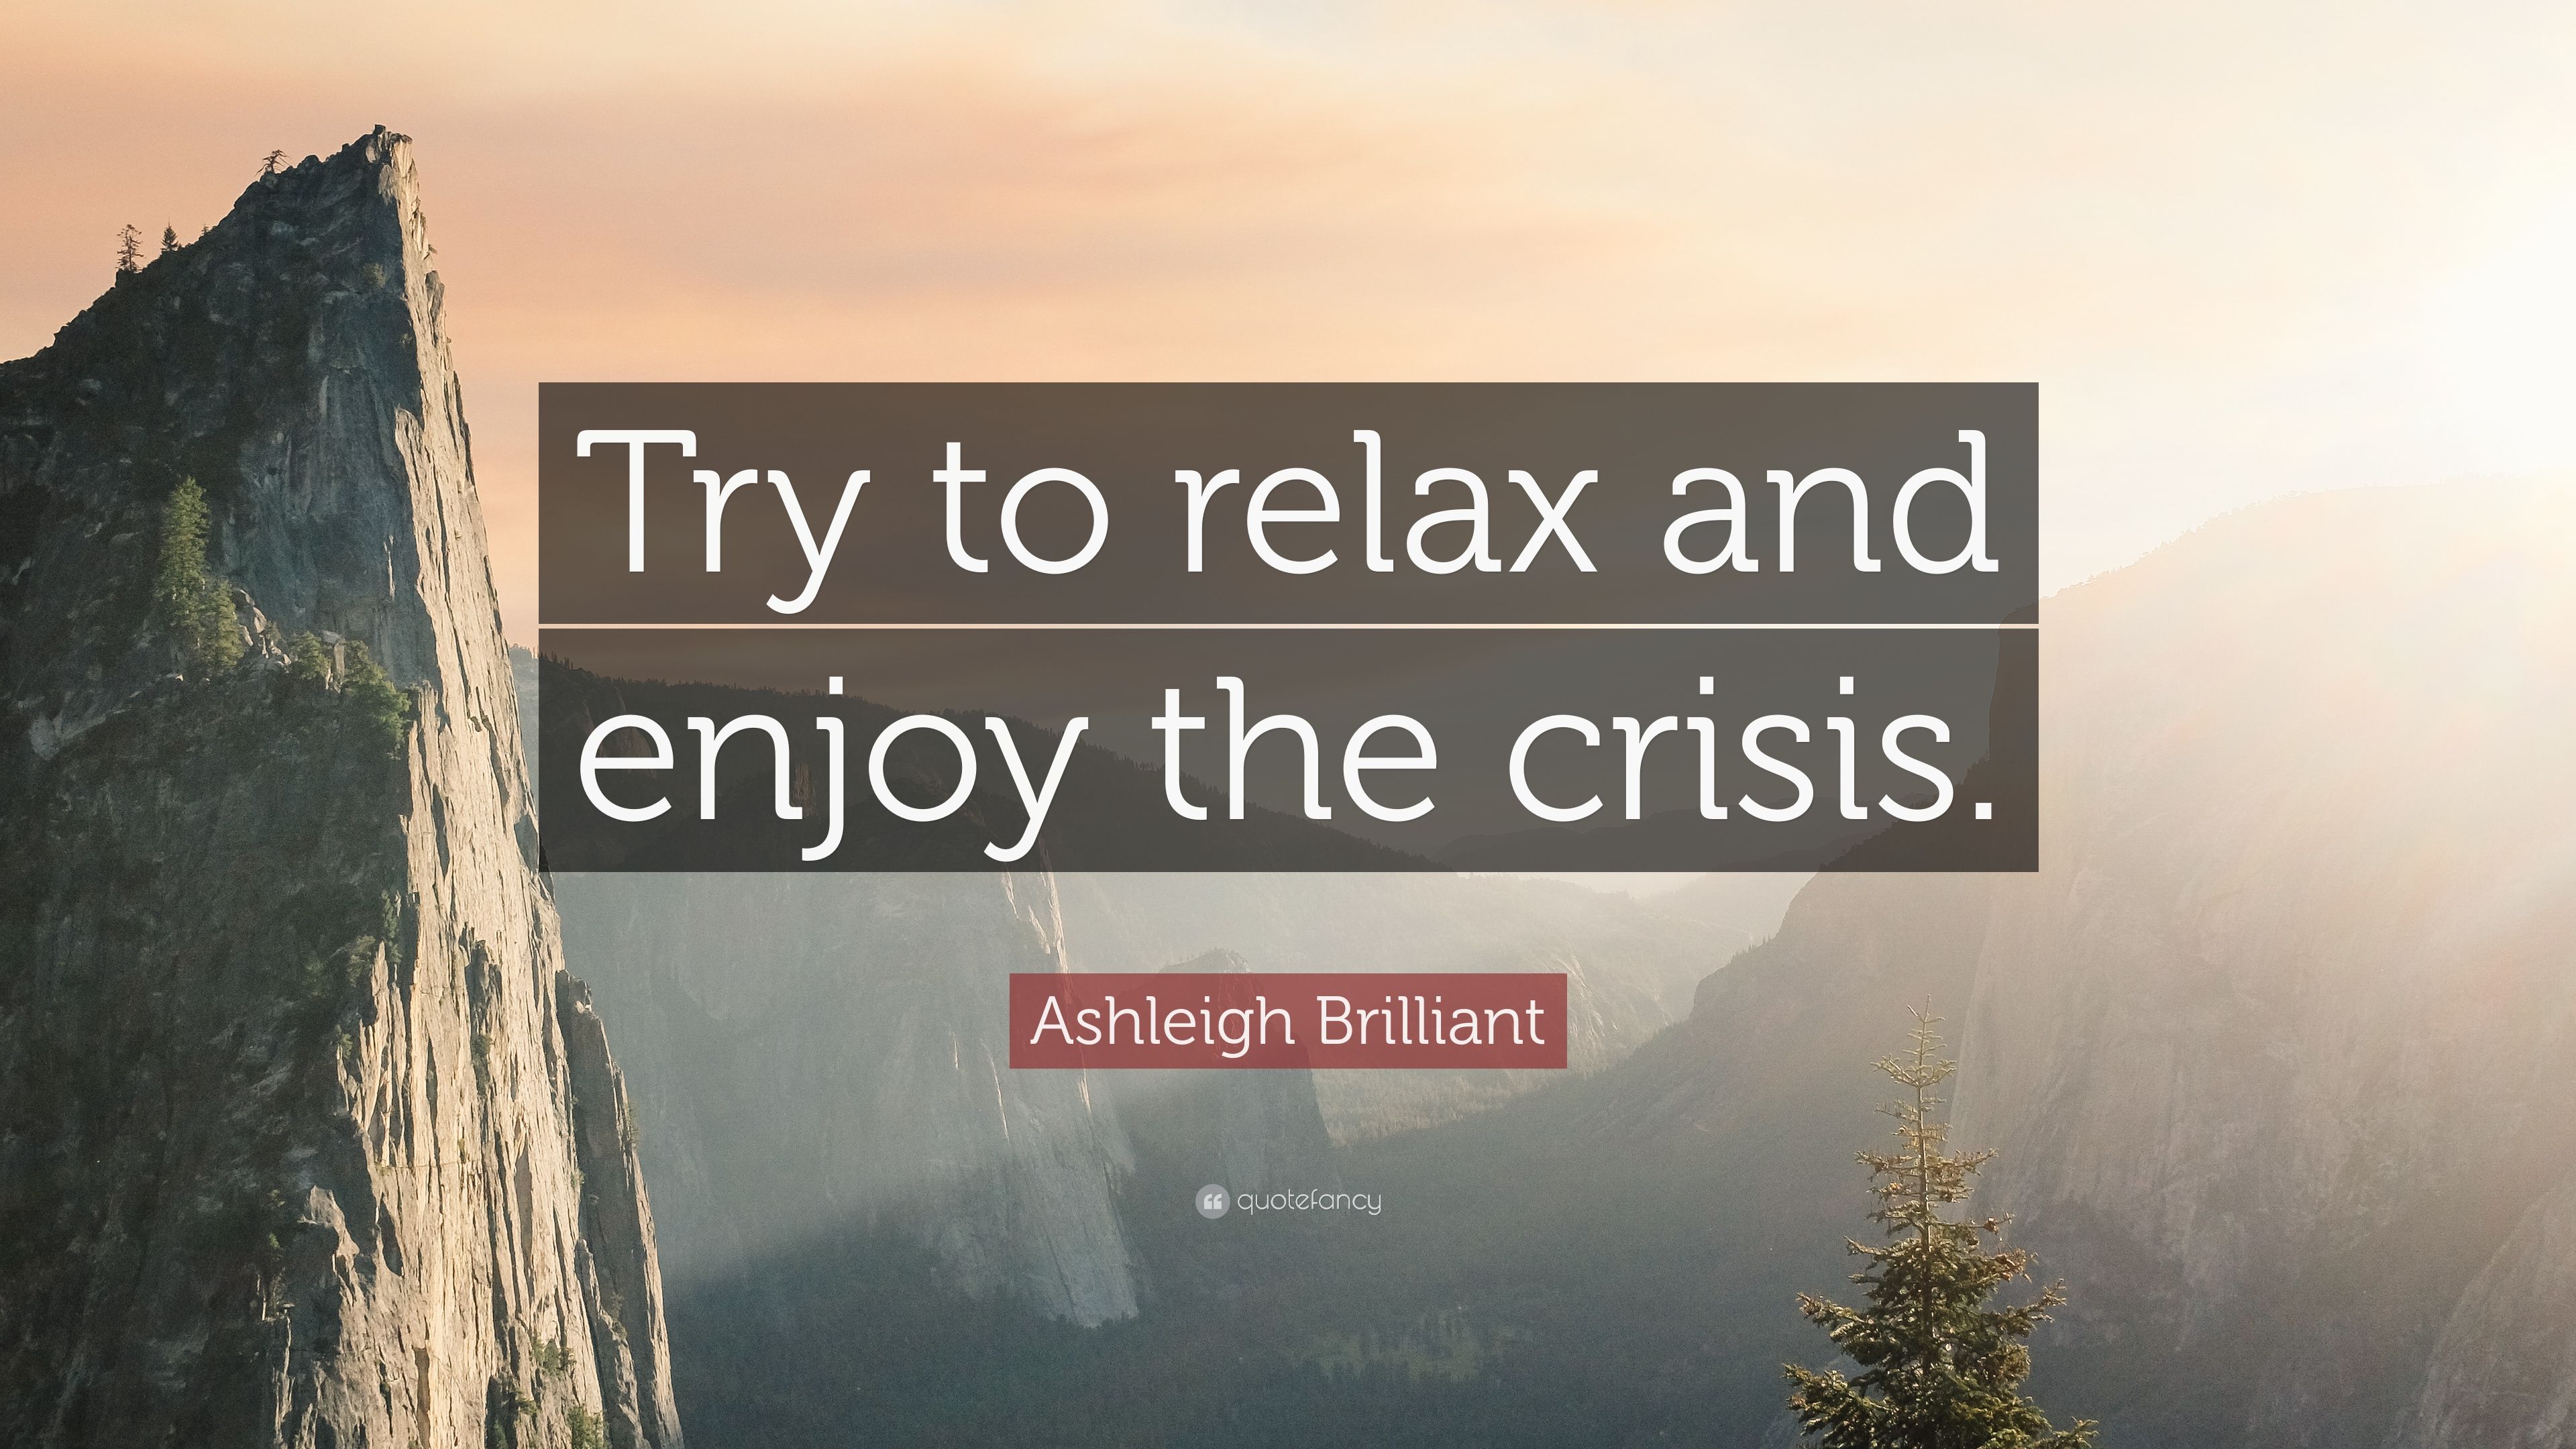 Ashleigh Brilliant Quote: “Try to relax and enjoy the crisis.” 9